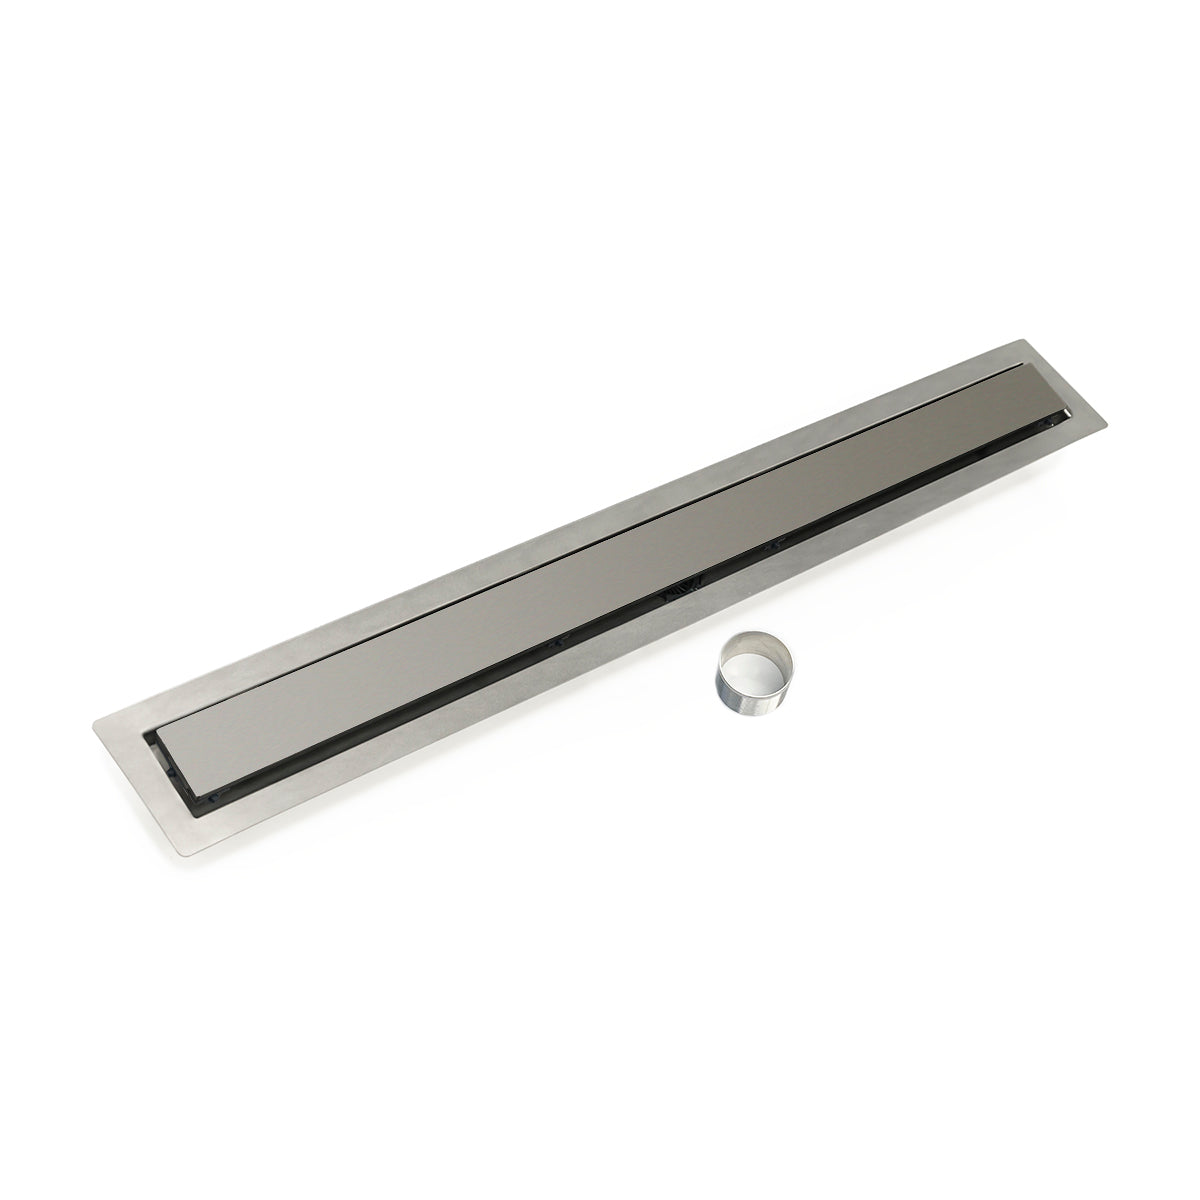 Infinity Drain 36" FCB Series Double Waterproofing Linear Drain Kit with 2 1/2" Solid Grate